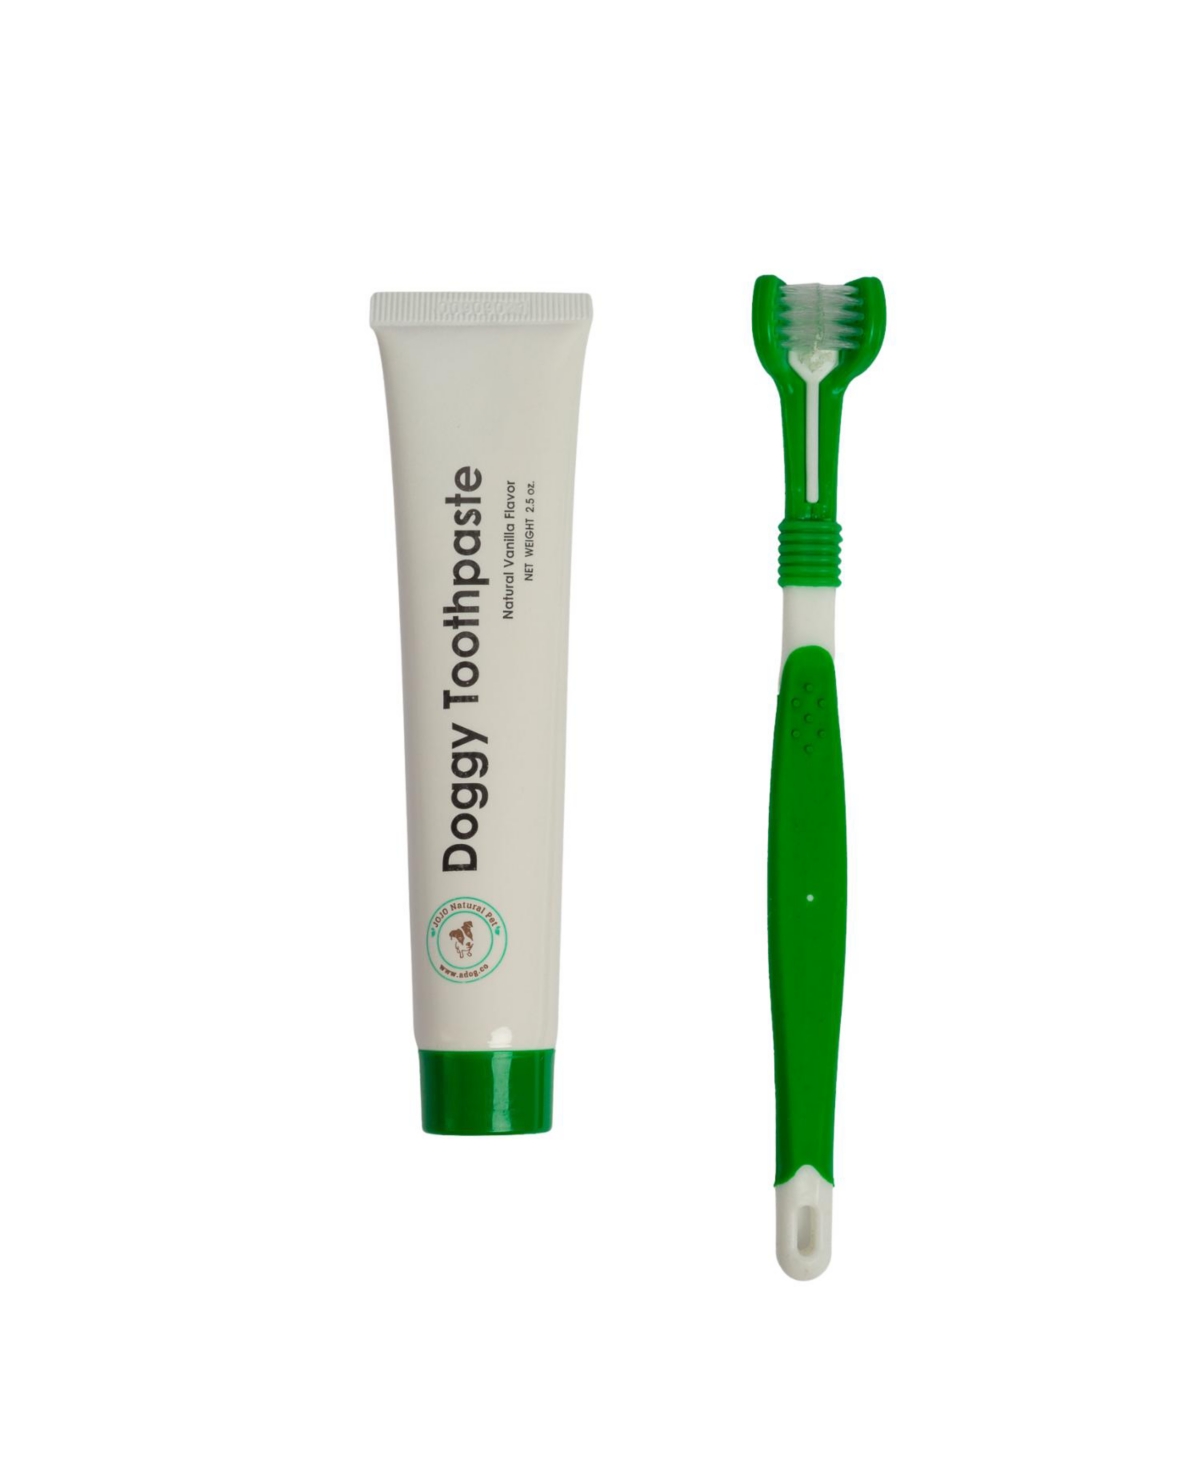 Triple Headed Dog Tooth Brush with All-Natural Toothpaste - Open Miscellaneous